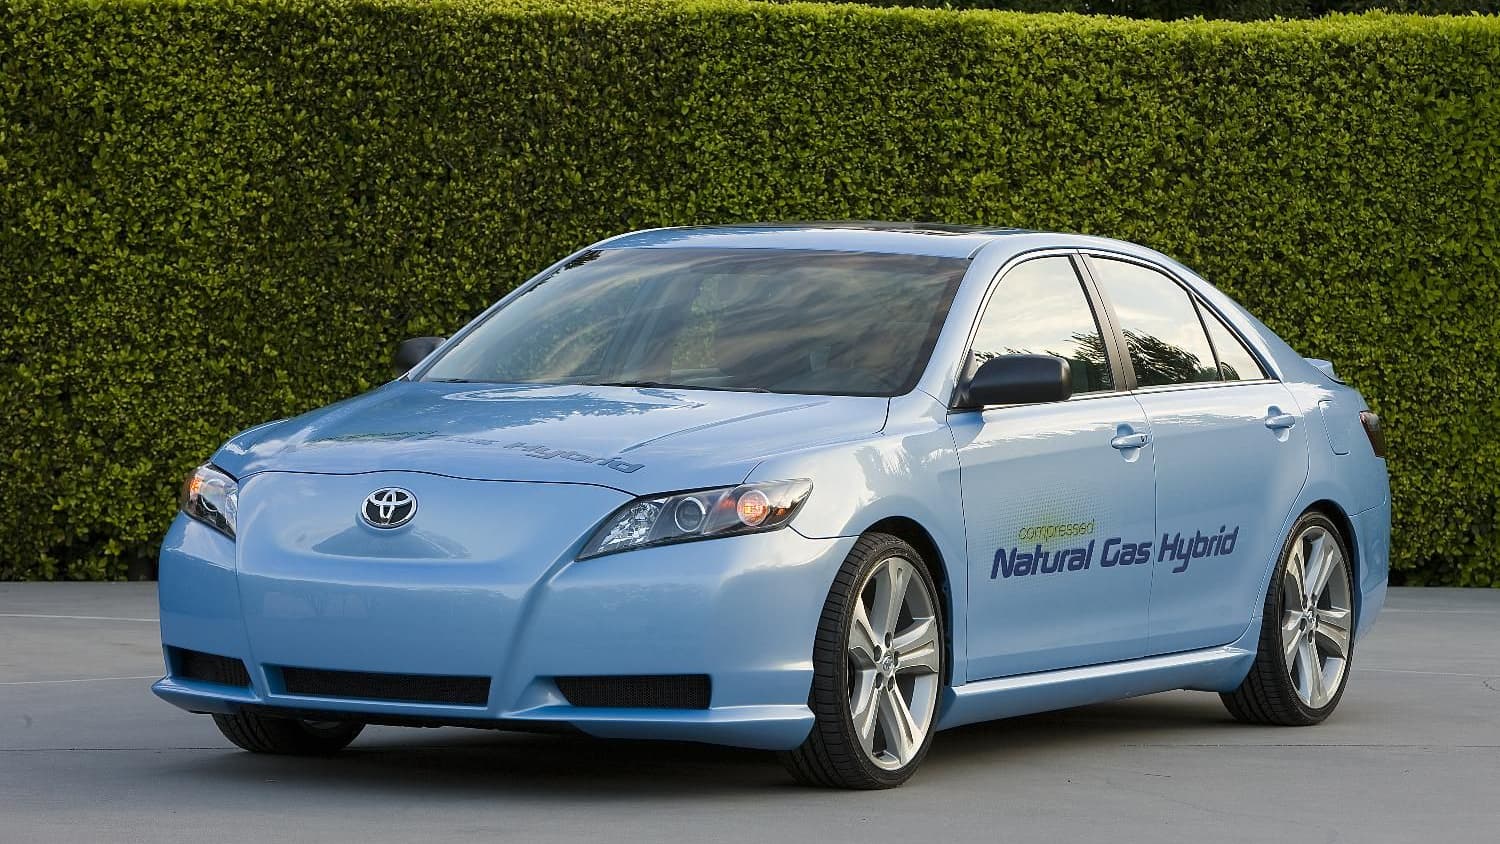 Toyota Camry Hybrid CNG concept car, shown at 2008 Los Angeles Auto Show